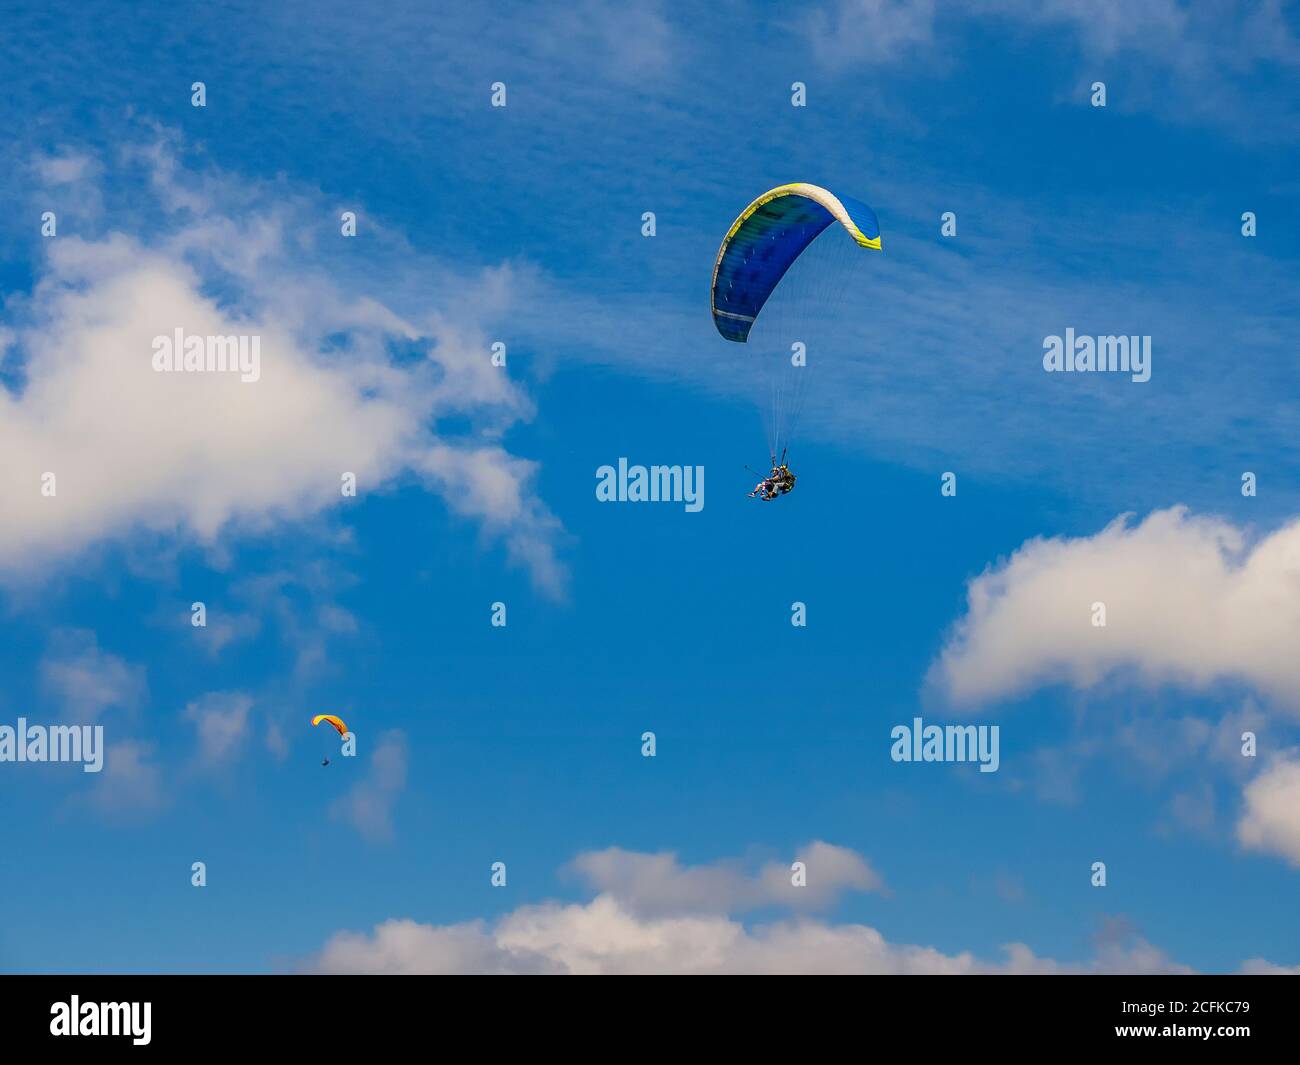 2020-08-23 Borzhava, Ukraine. Tandem paragliders in the sky. Typical tourist activity in Carpathian mountains Stock Photo